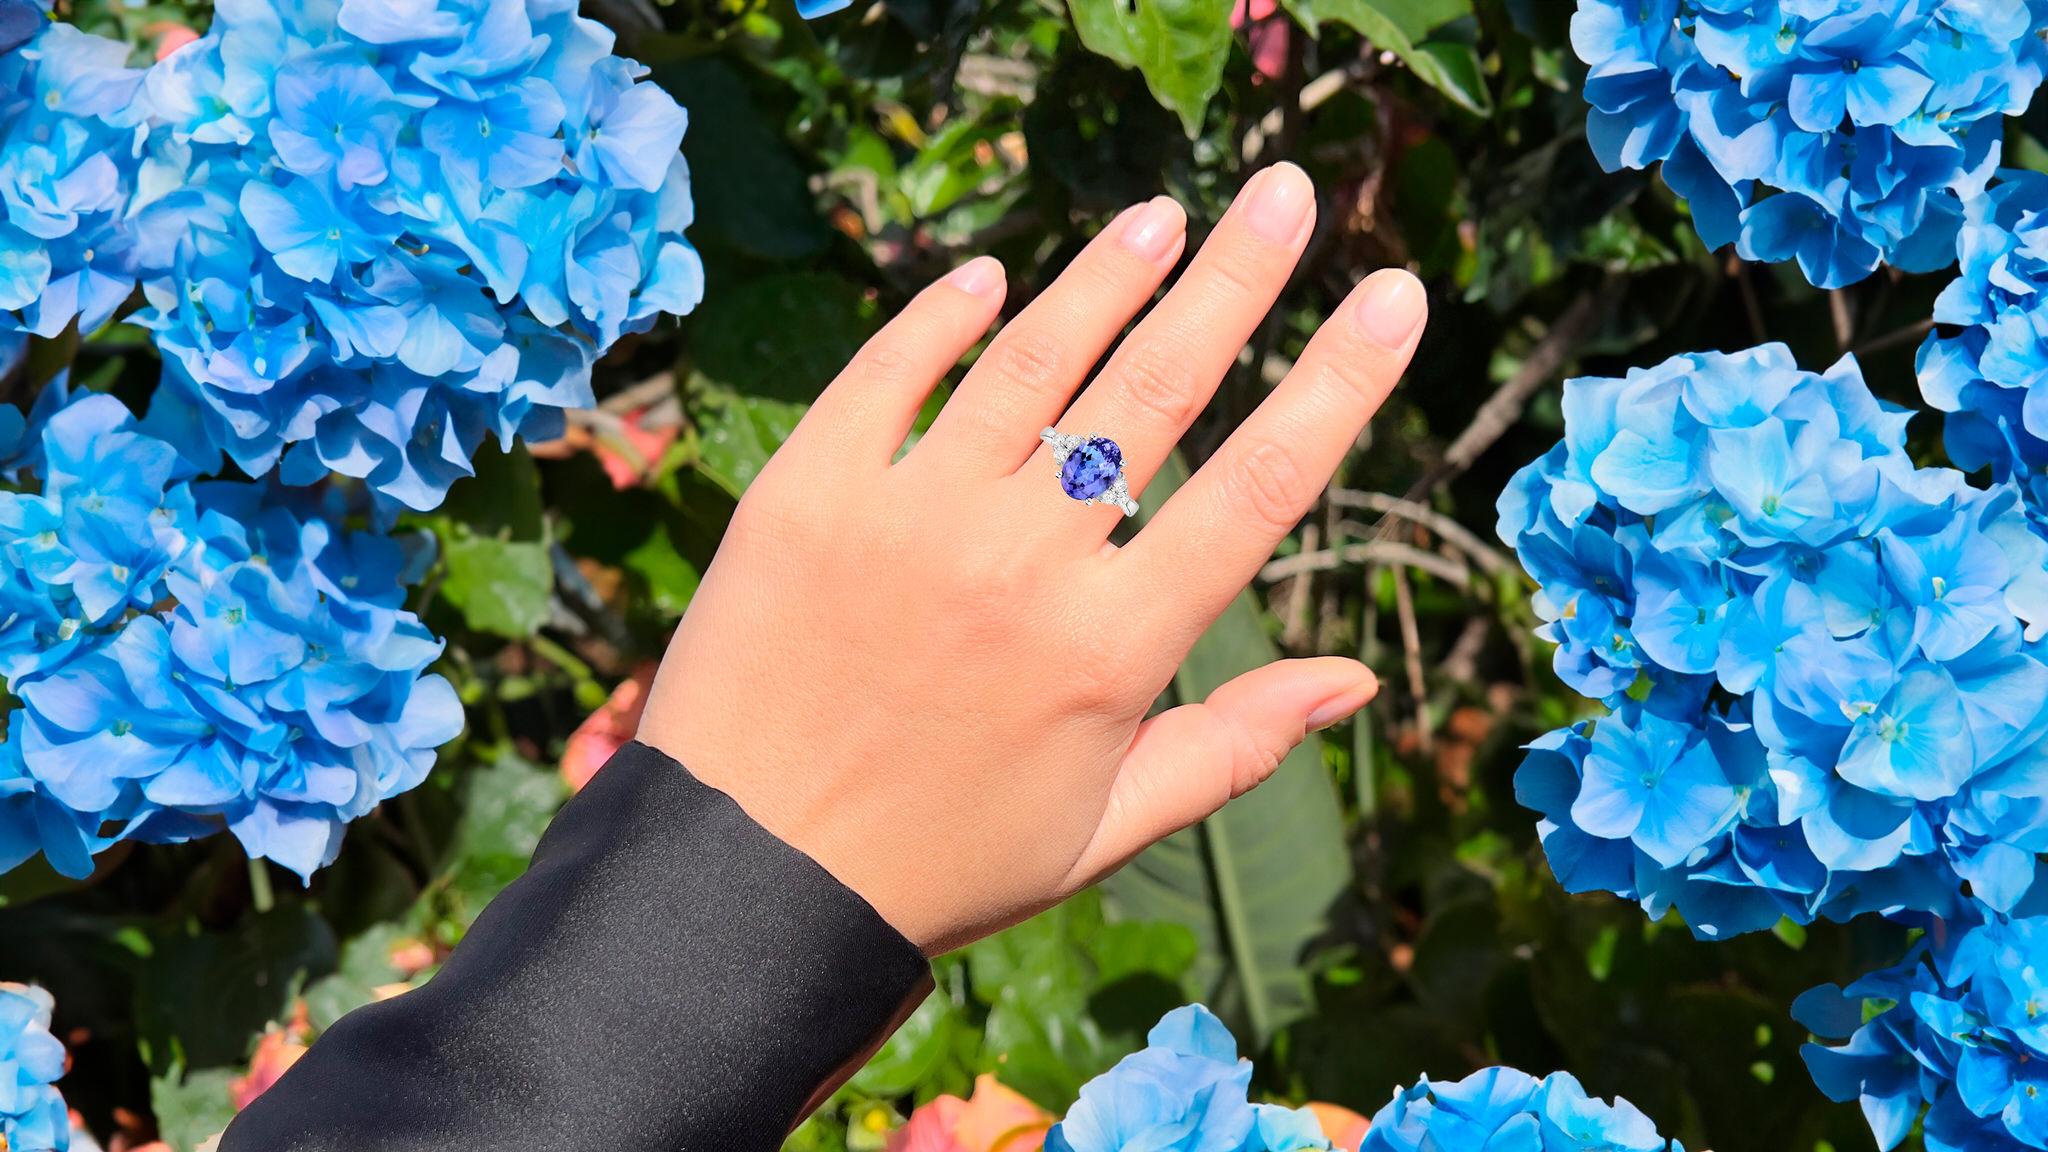 It comes with the original IGI Certificate
All Gemstones are Natural
Tanzanite = 3.48 Carats
Diamonds = 0.42 Carats
Metal: 14K White Gold
Ring Size: 7* US
*It can be resized complimentary